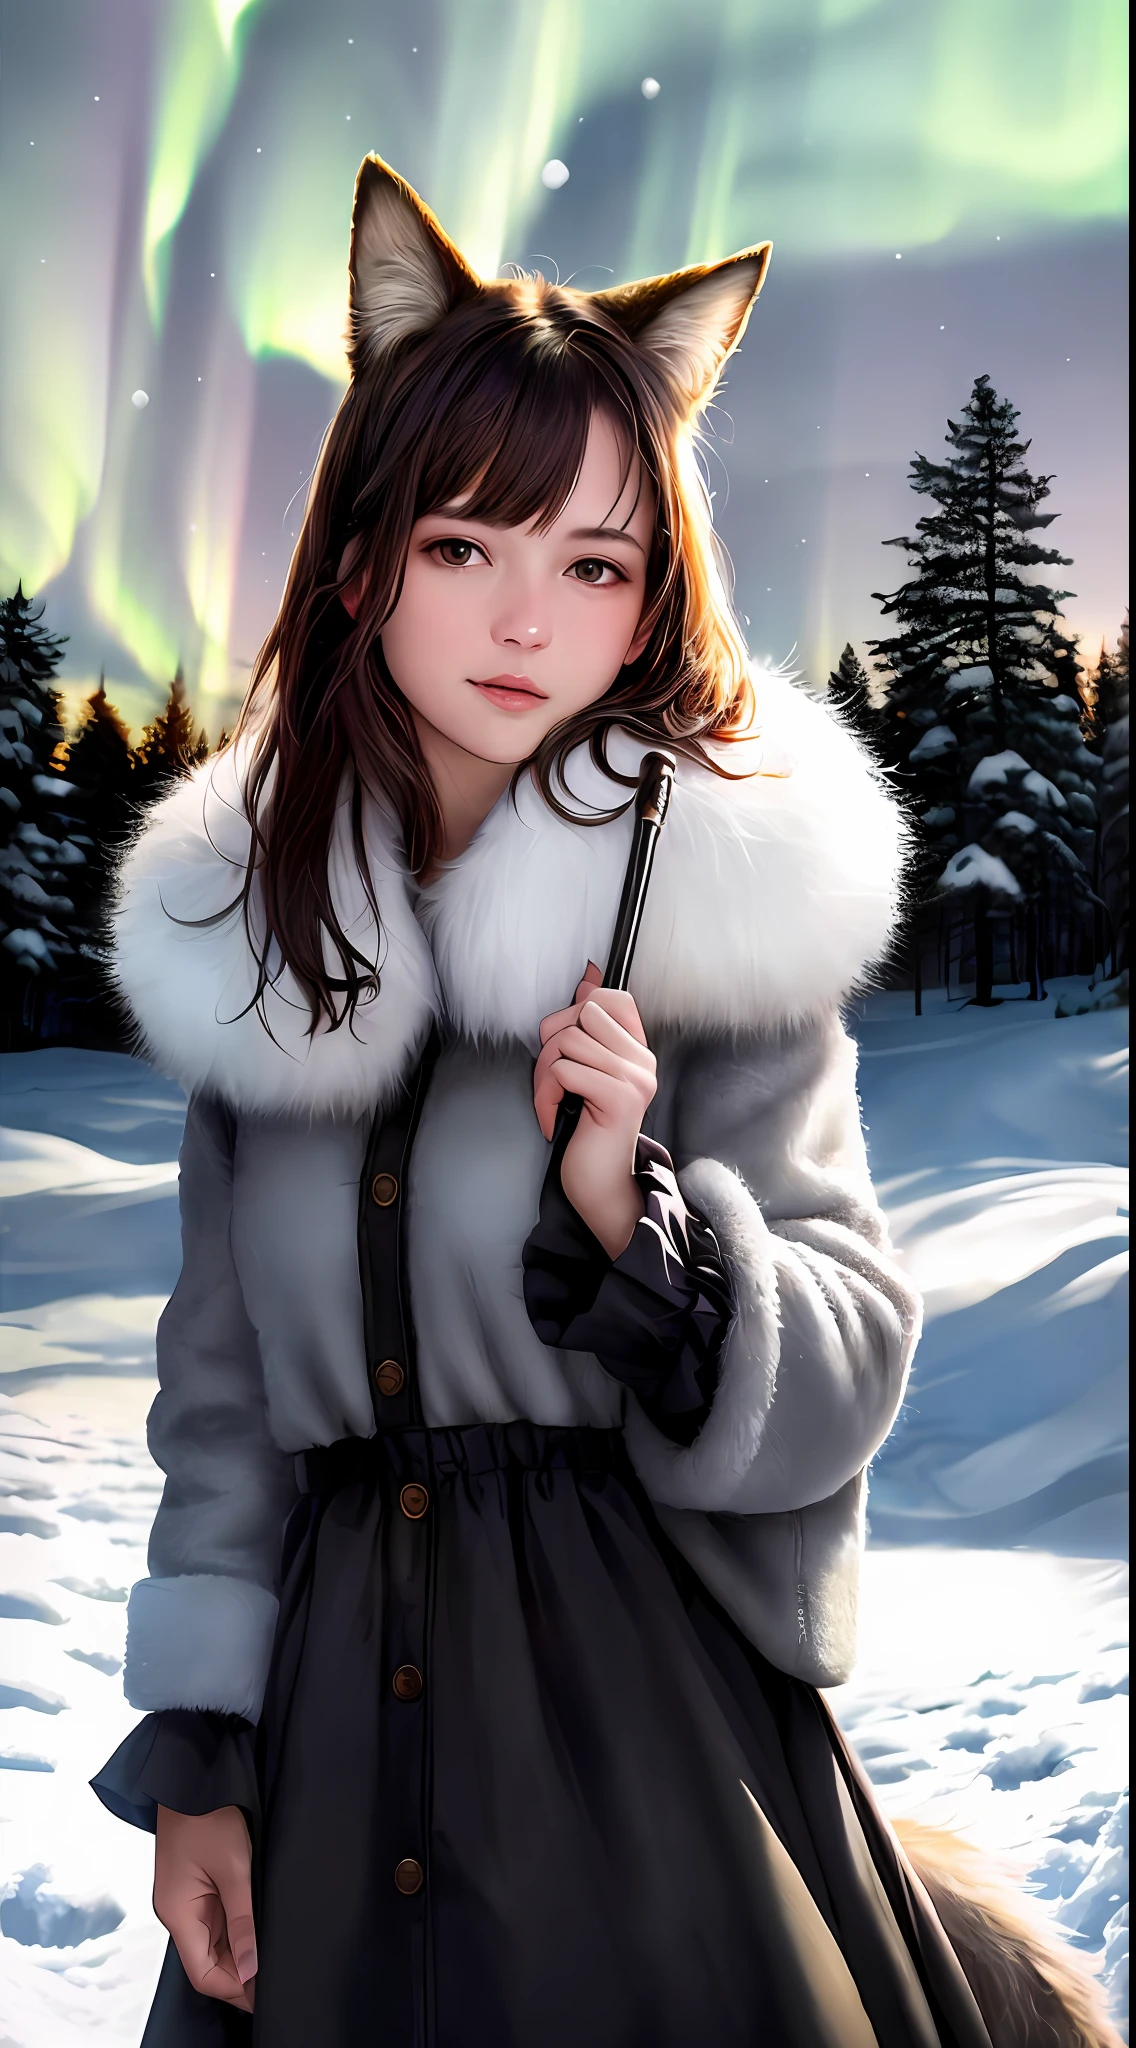 (raw photo:1.2), (photorealistic:1.4), (best quality:1.4), (ultra highres:1.2), (highly detailed:1.3), (HDR:1.2), (cinematic lighting:1.3), (detailed eyes), (facial details), (fur details), (snowy:1.2). ), Cute Little Fox, Standing, (3/4 Portrait: 1.2), (Furry Tail: 1.2), (Soft Fur: 1.2), (Moe: 1.2), (Looking at the Audience), (Innocent Expression), (Soft Light), (Dreamy), (Dream: 1.3), (Ethereal: 1.3), (Magic: 1.2), (Snowflake: 1.2), (Winter Wonderland aurora: 1.3), (Whimsical: 1.2), (Fun: 1.2), Bust, Solo